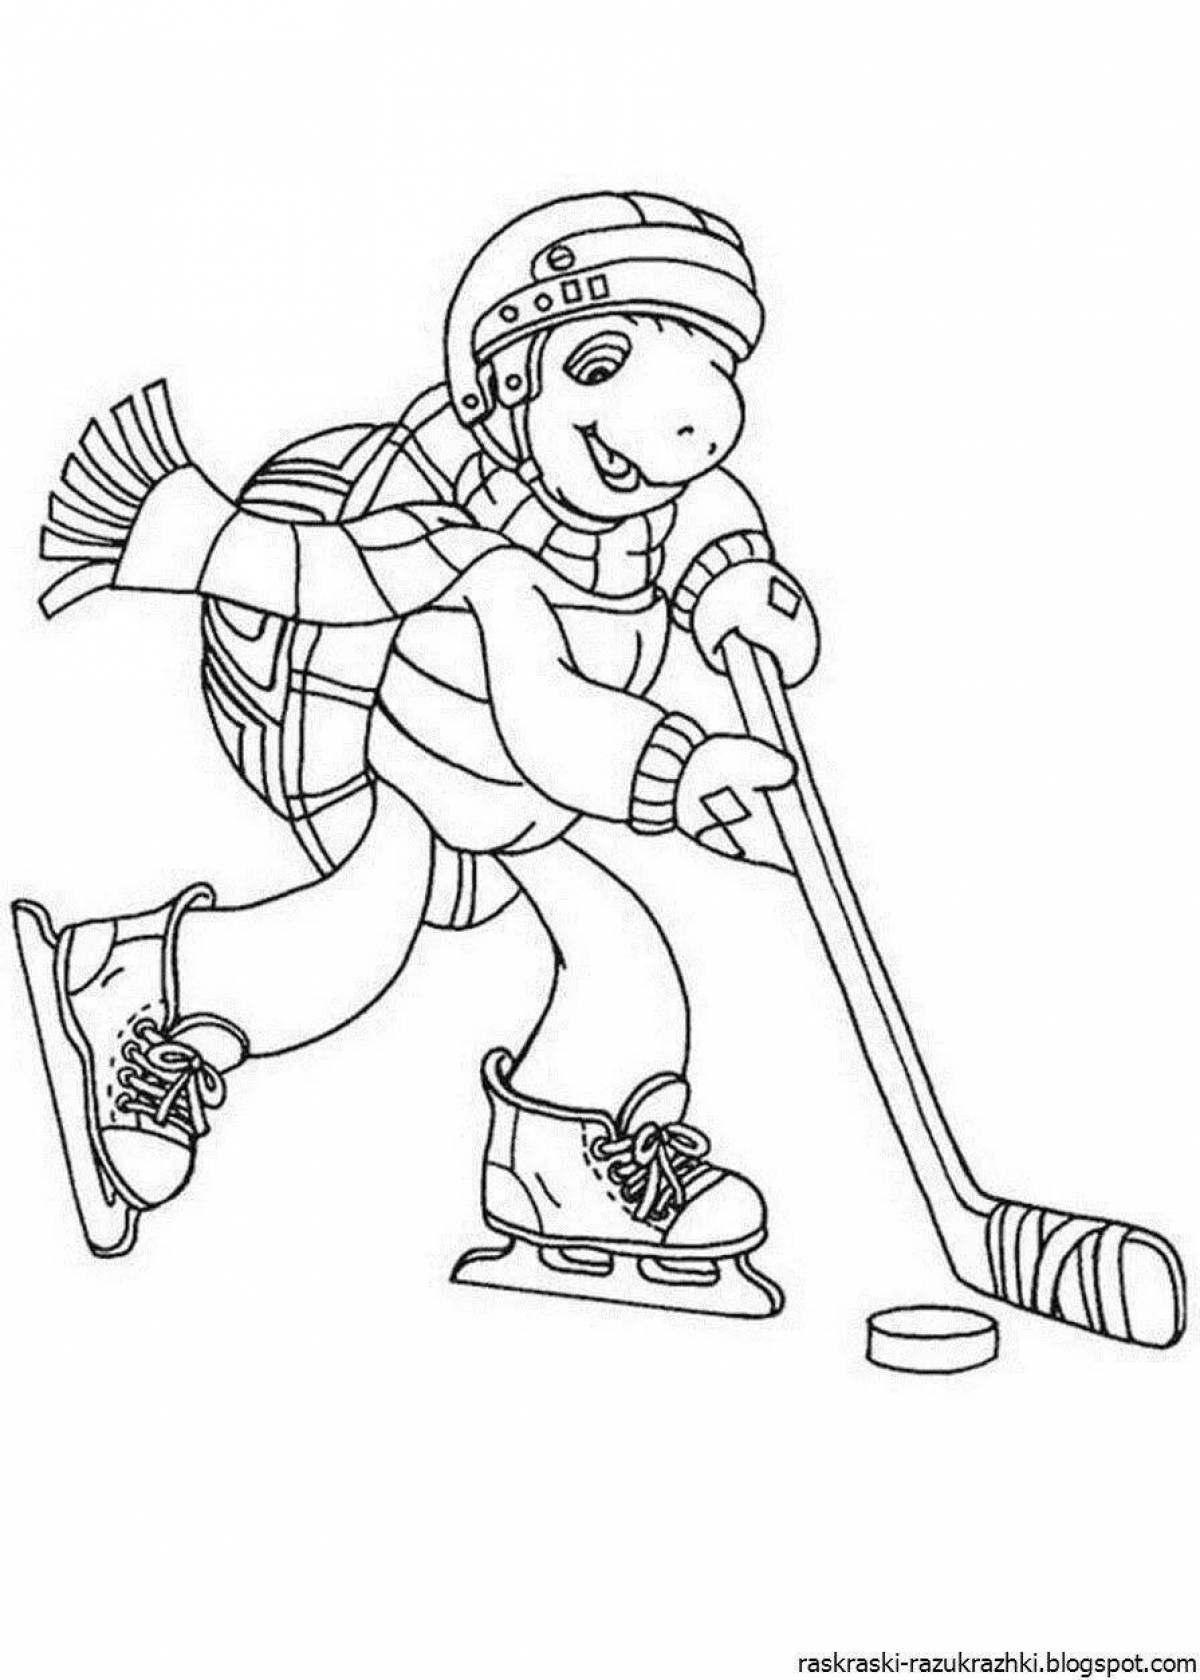 Fun coloring book for kids winter sports